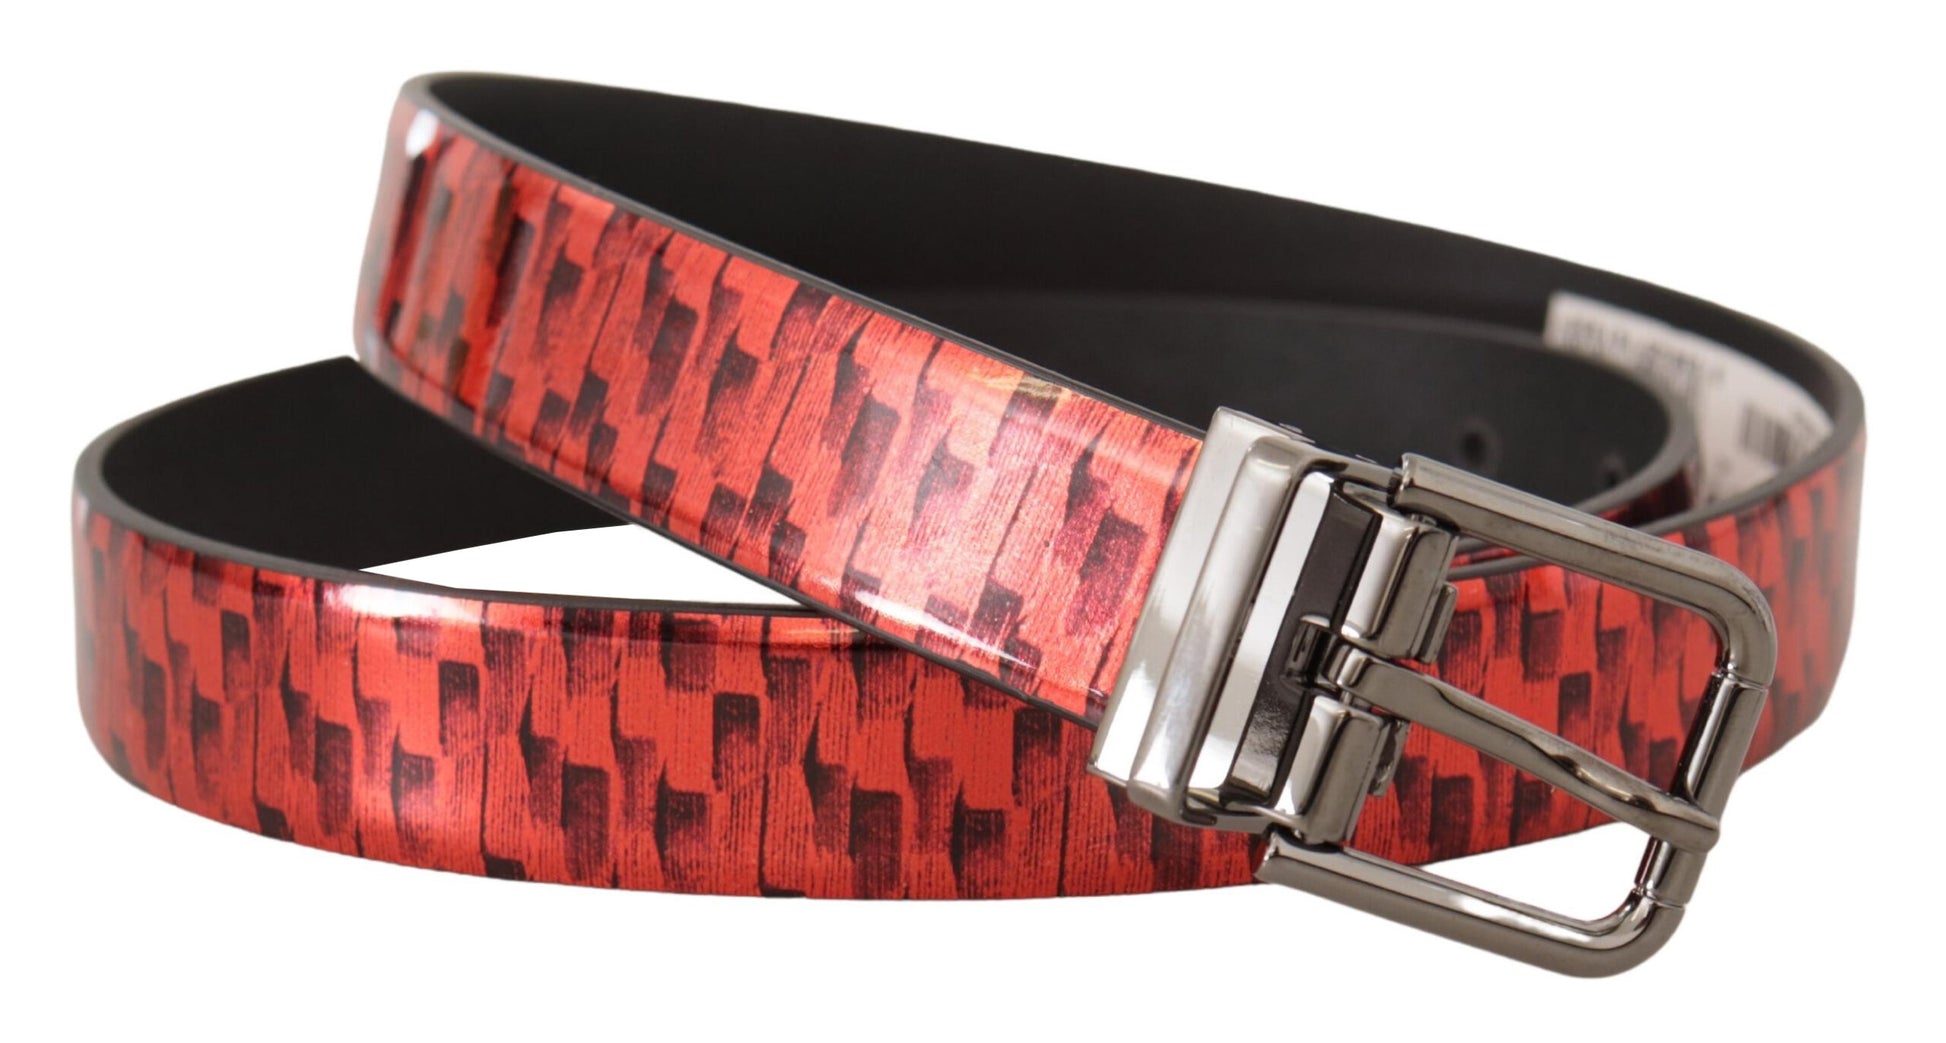 Dolce & Gabbana Elegant Red Leather Belt with Silver Buckle | Fashionsarah.com